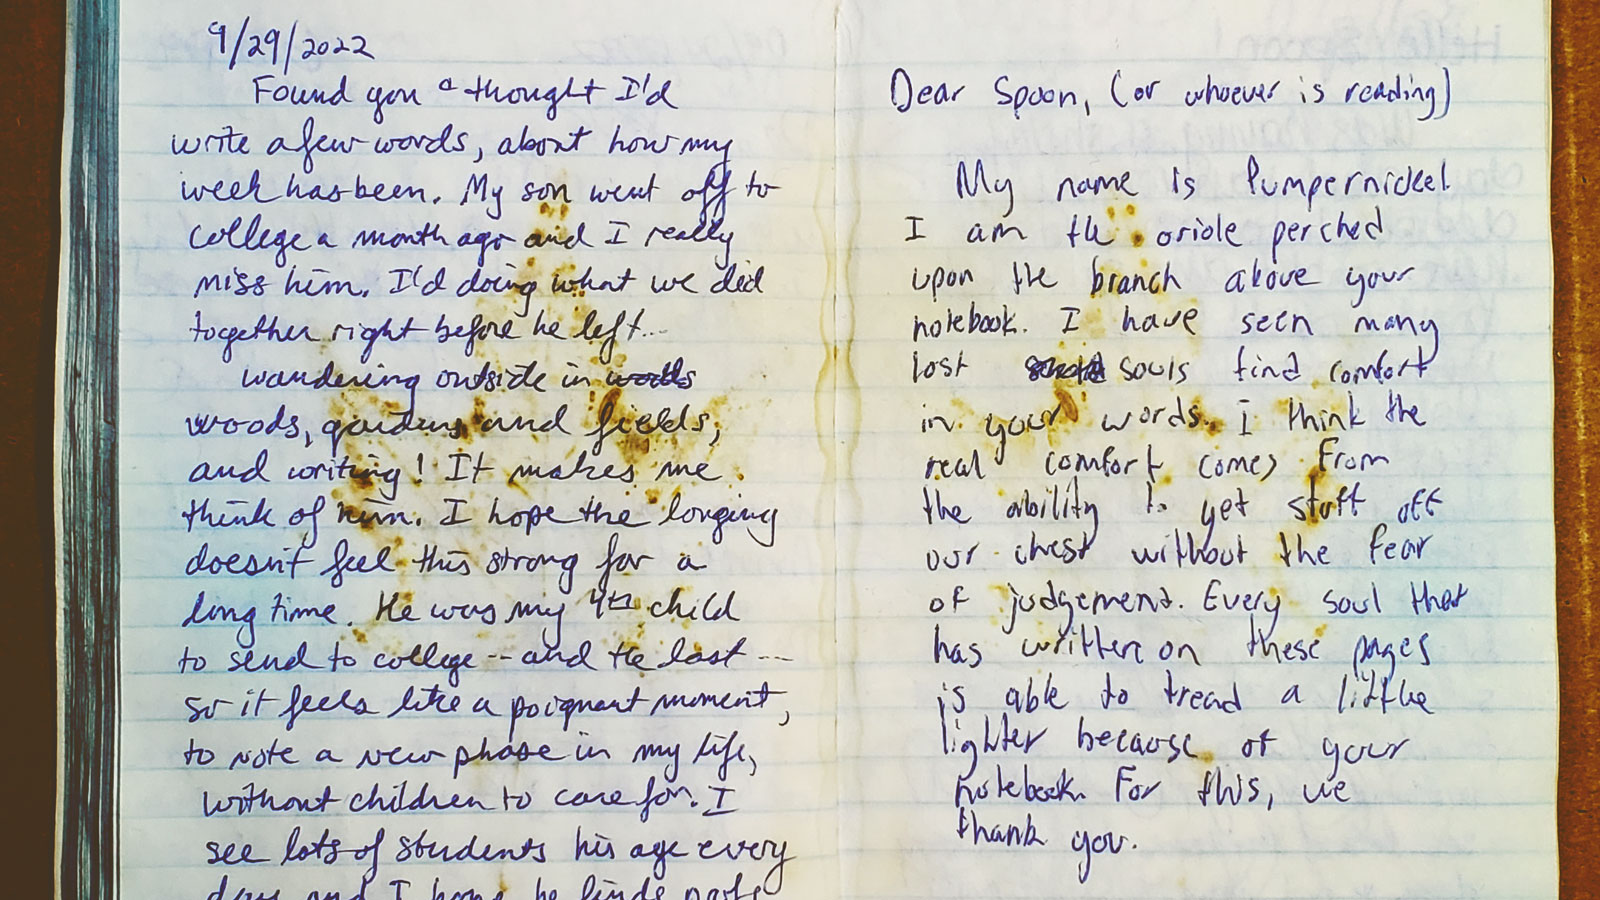 Two pages from a lost notebook containing written messages from two individuals.